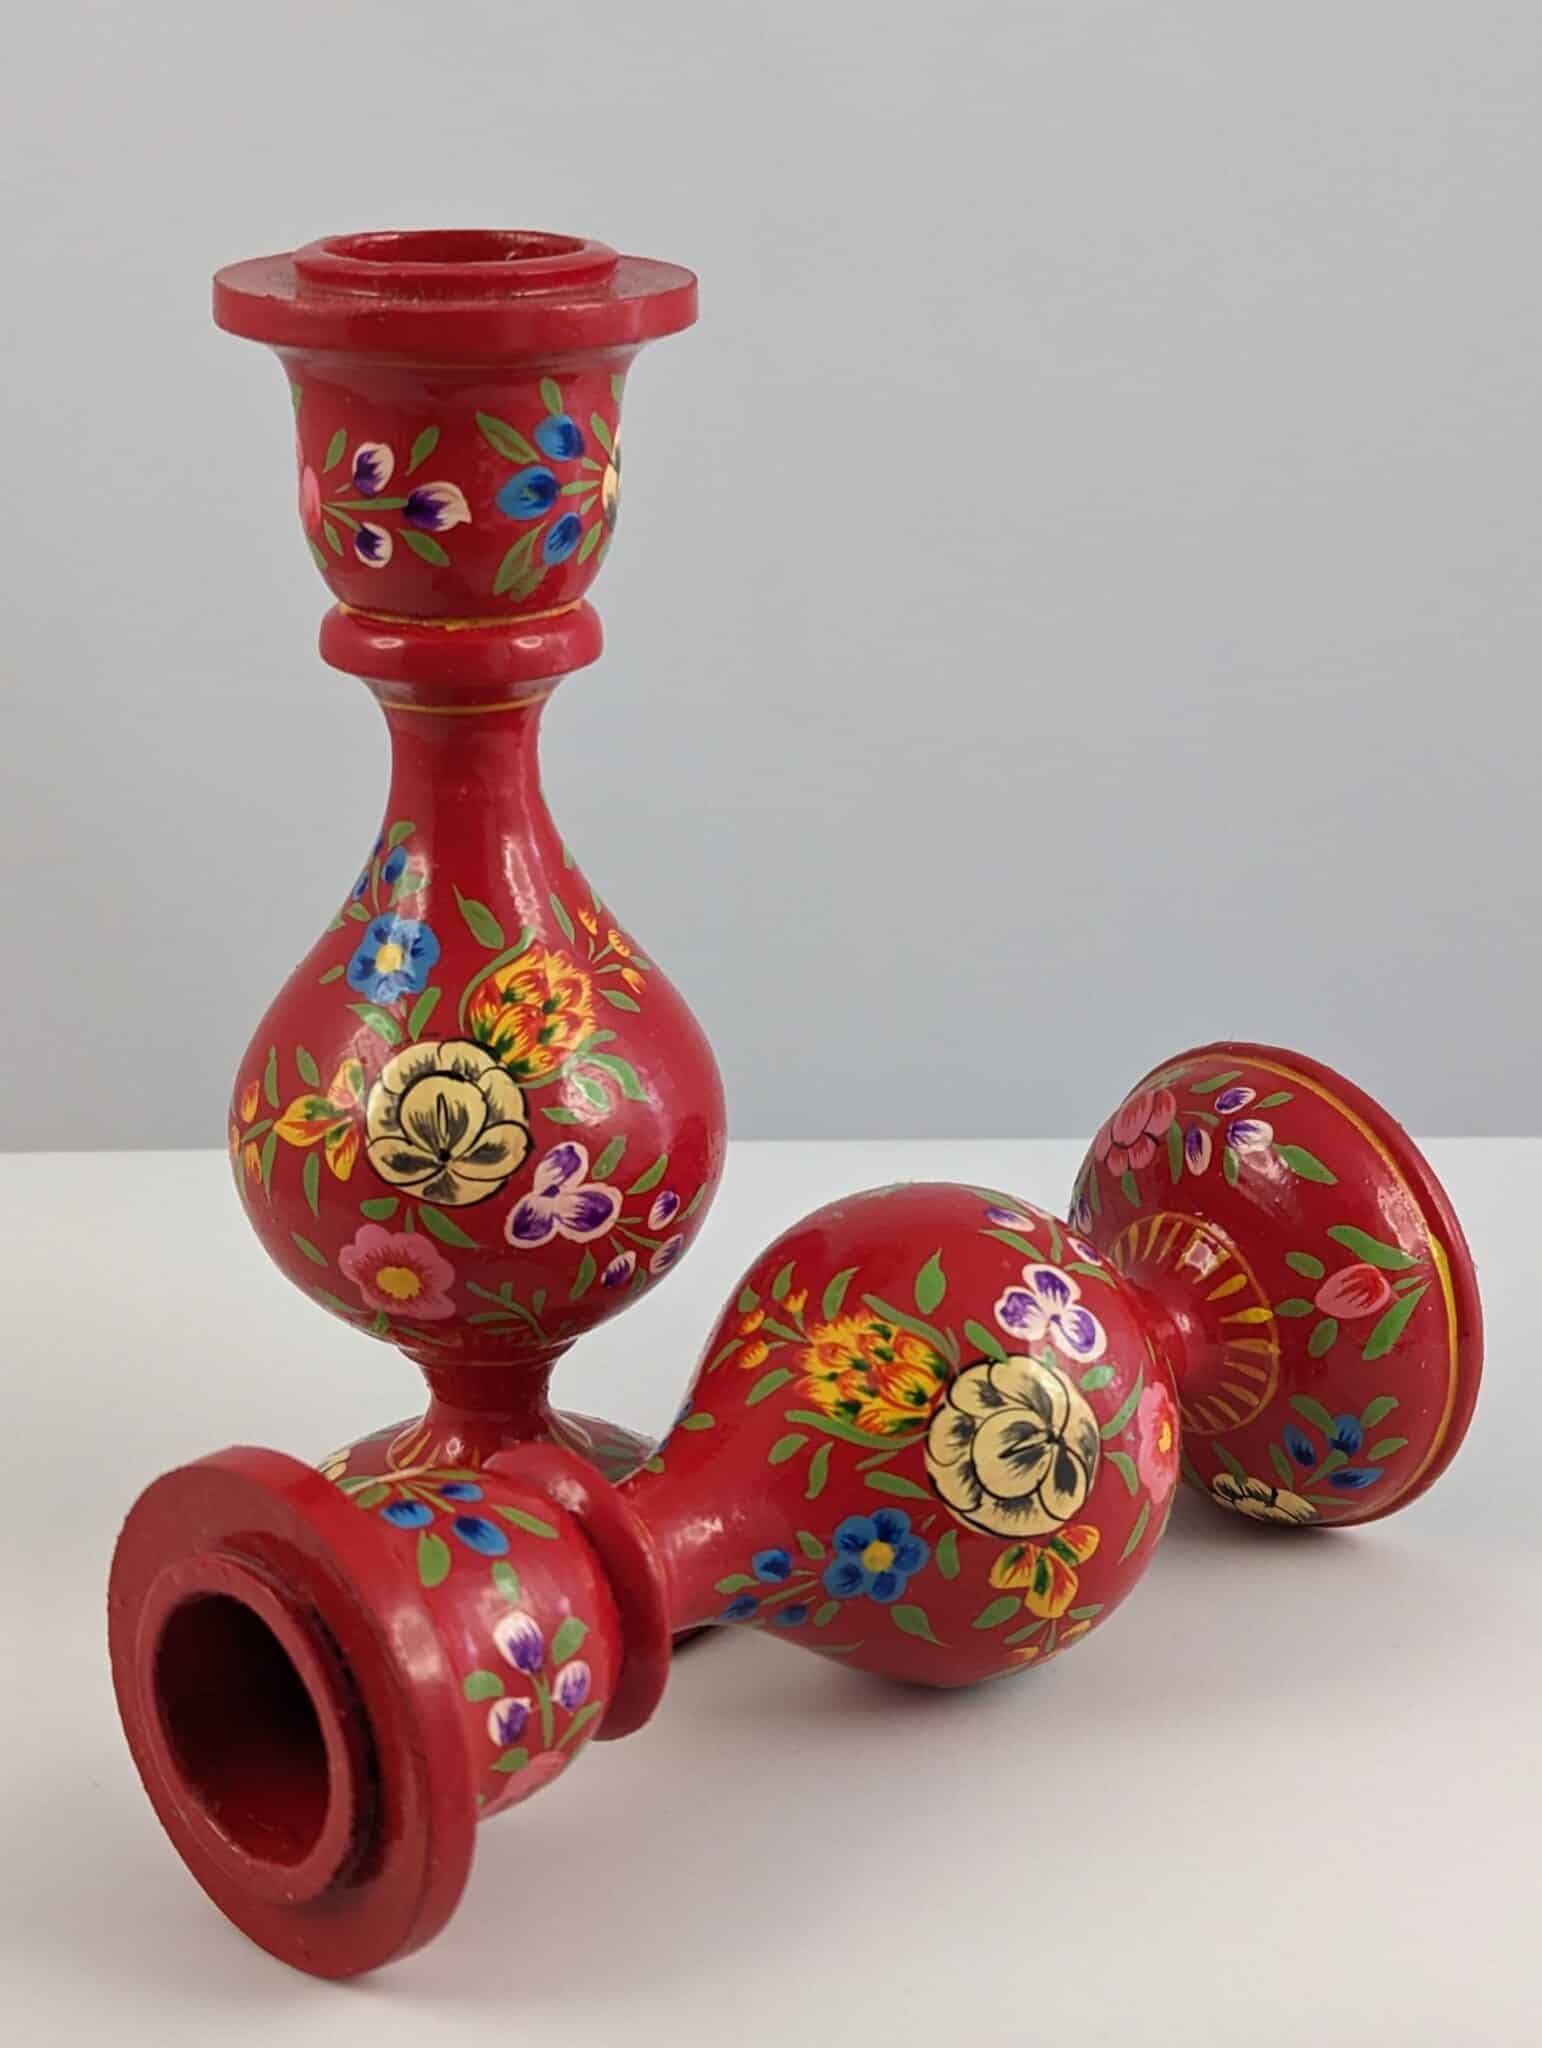 Handcrafted Wooden Candlesticks - Red